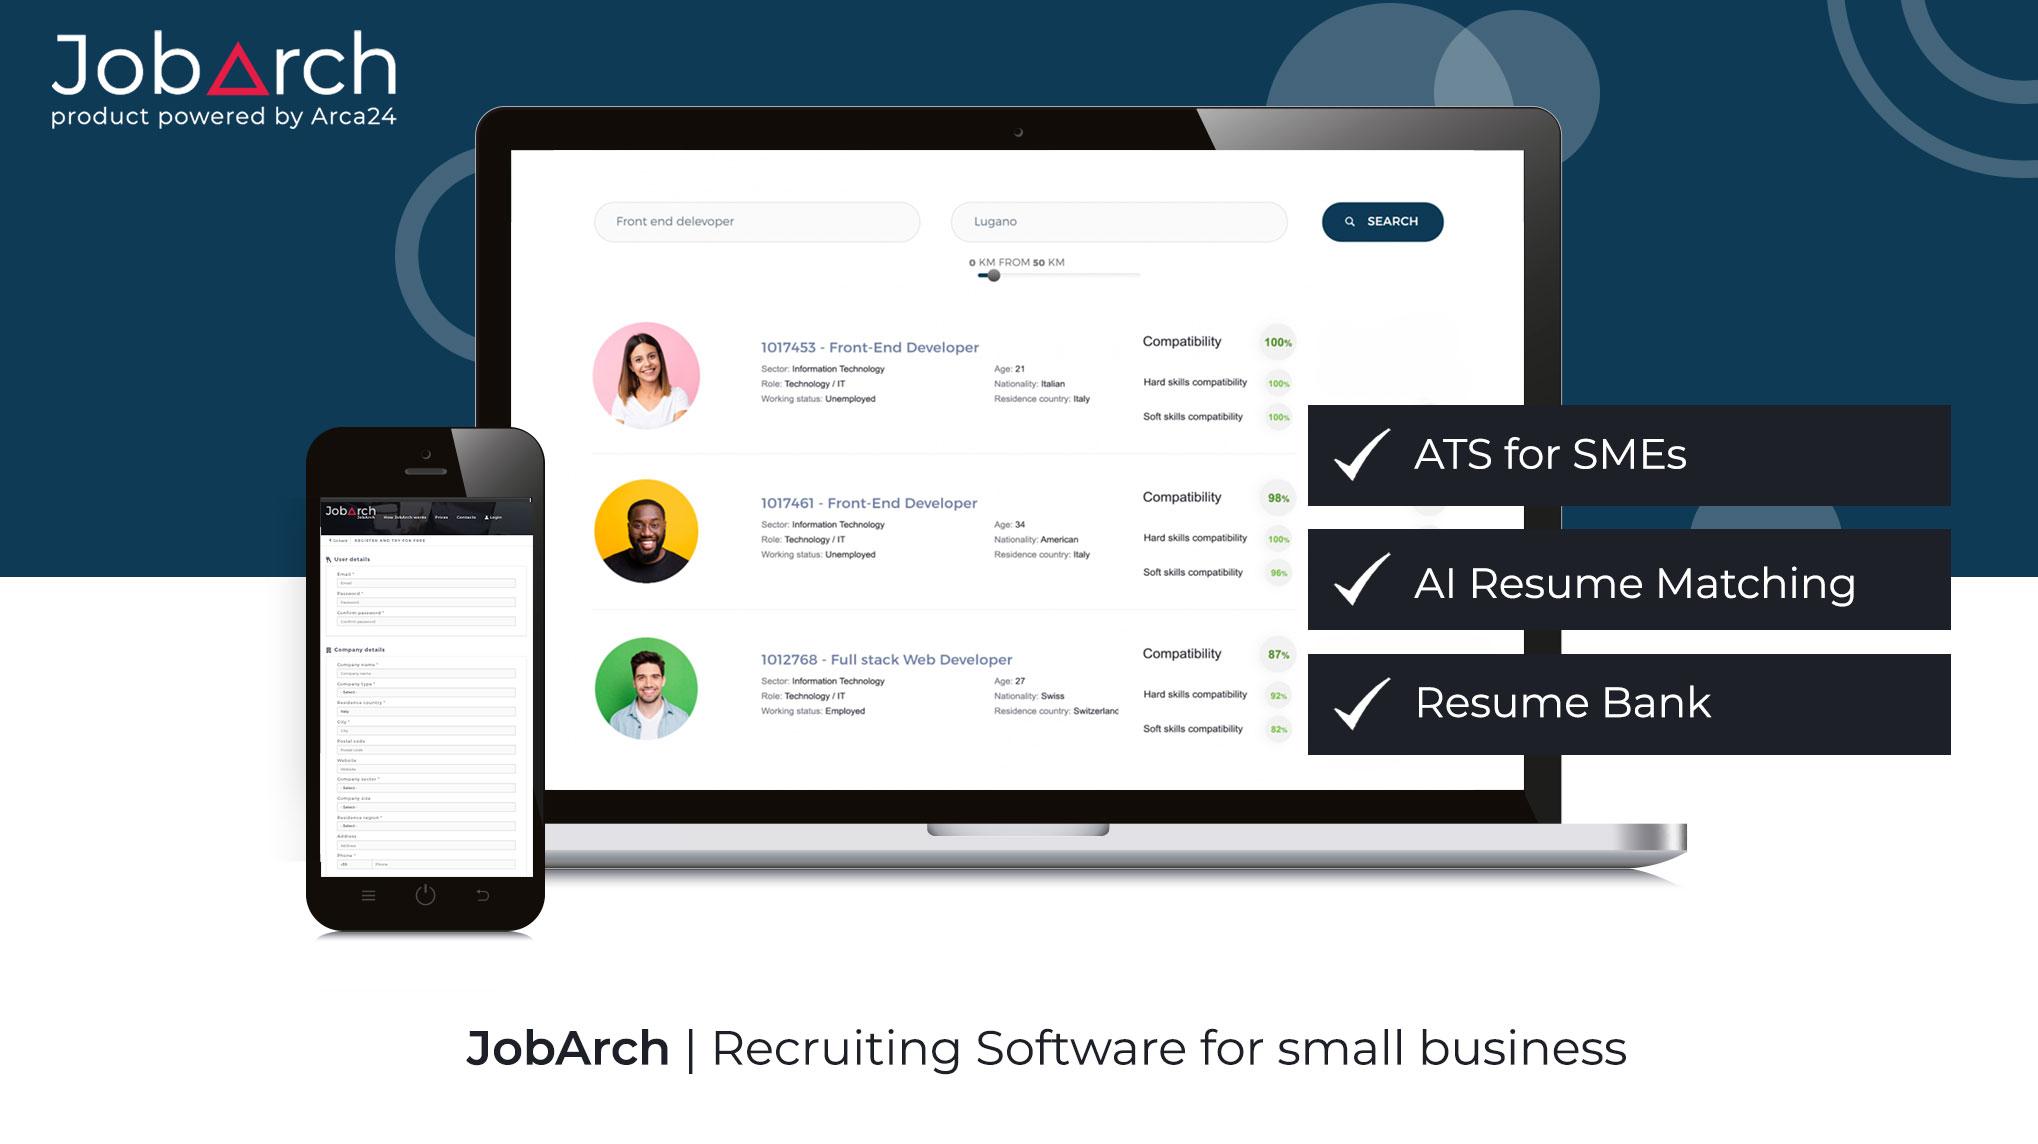 JobArch - An easy-to-use Applicant Tracking System. Fast and efficient recruitment and selection of candidates.